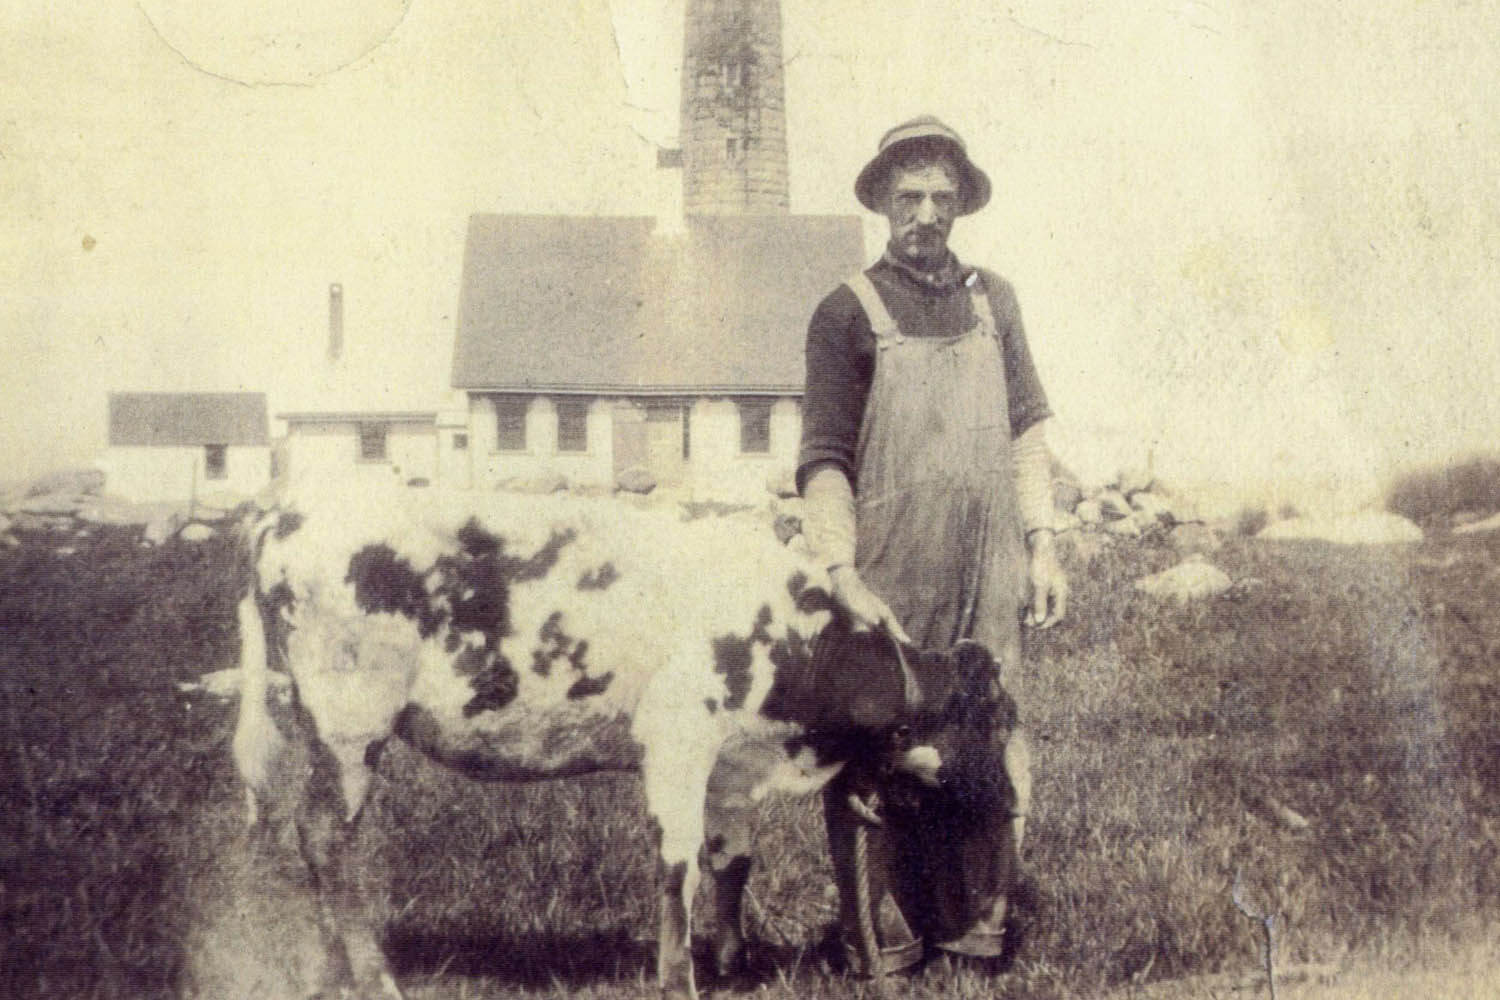 A man standing next to two cows in the grass.